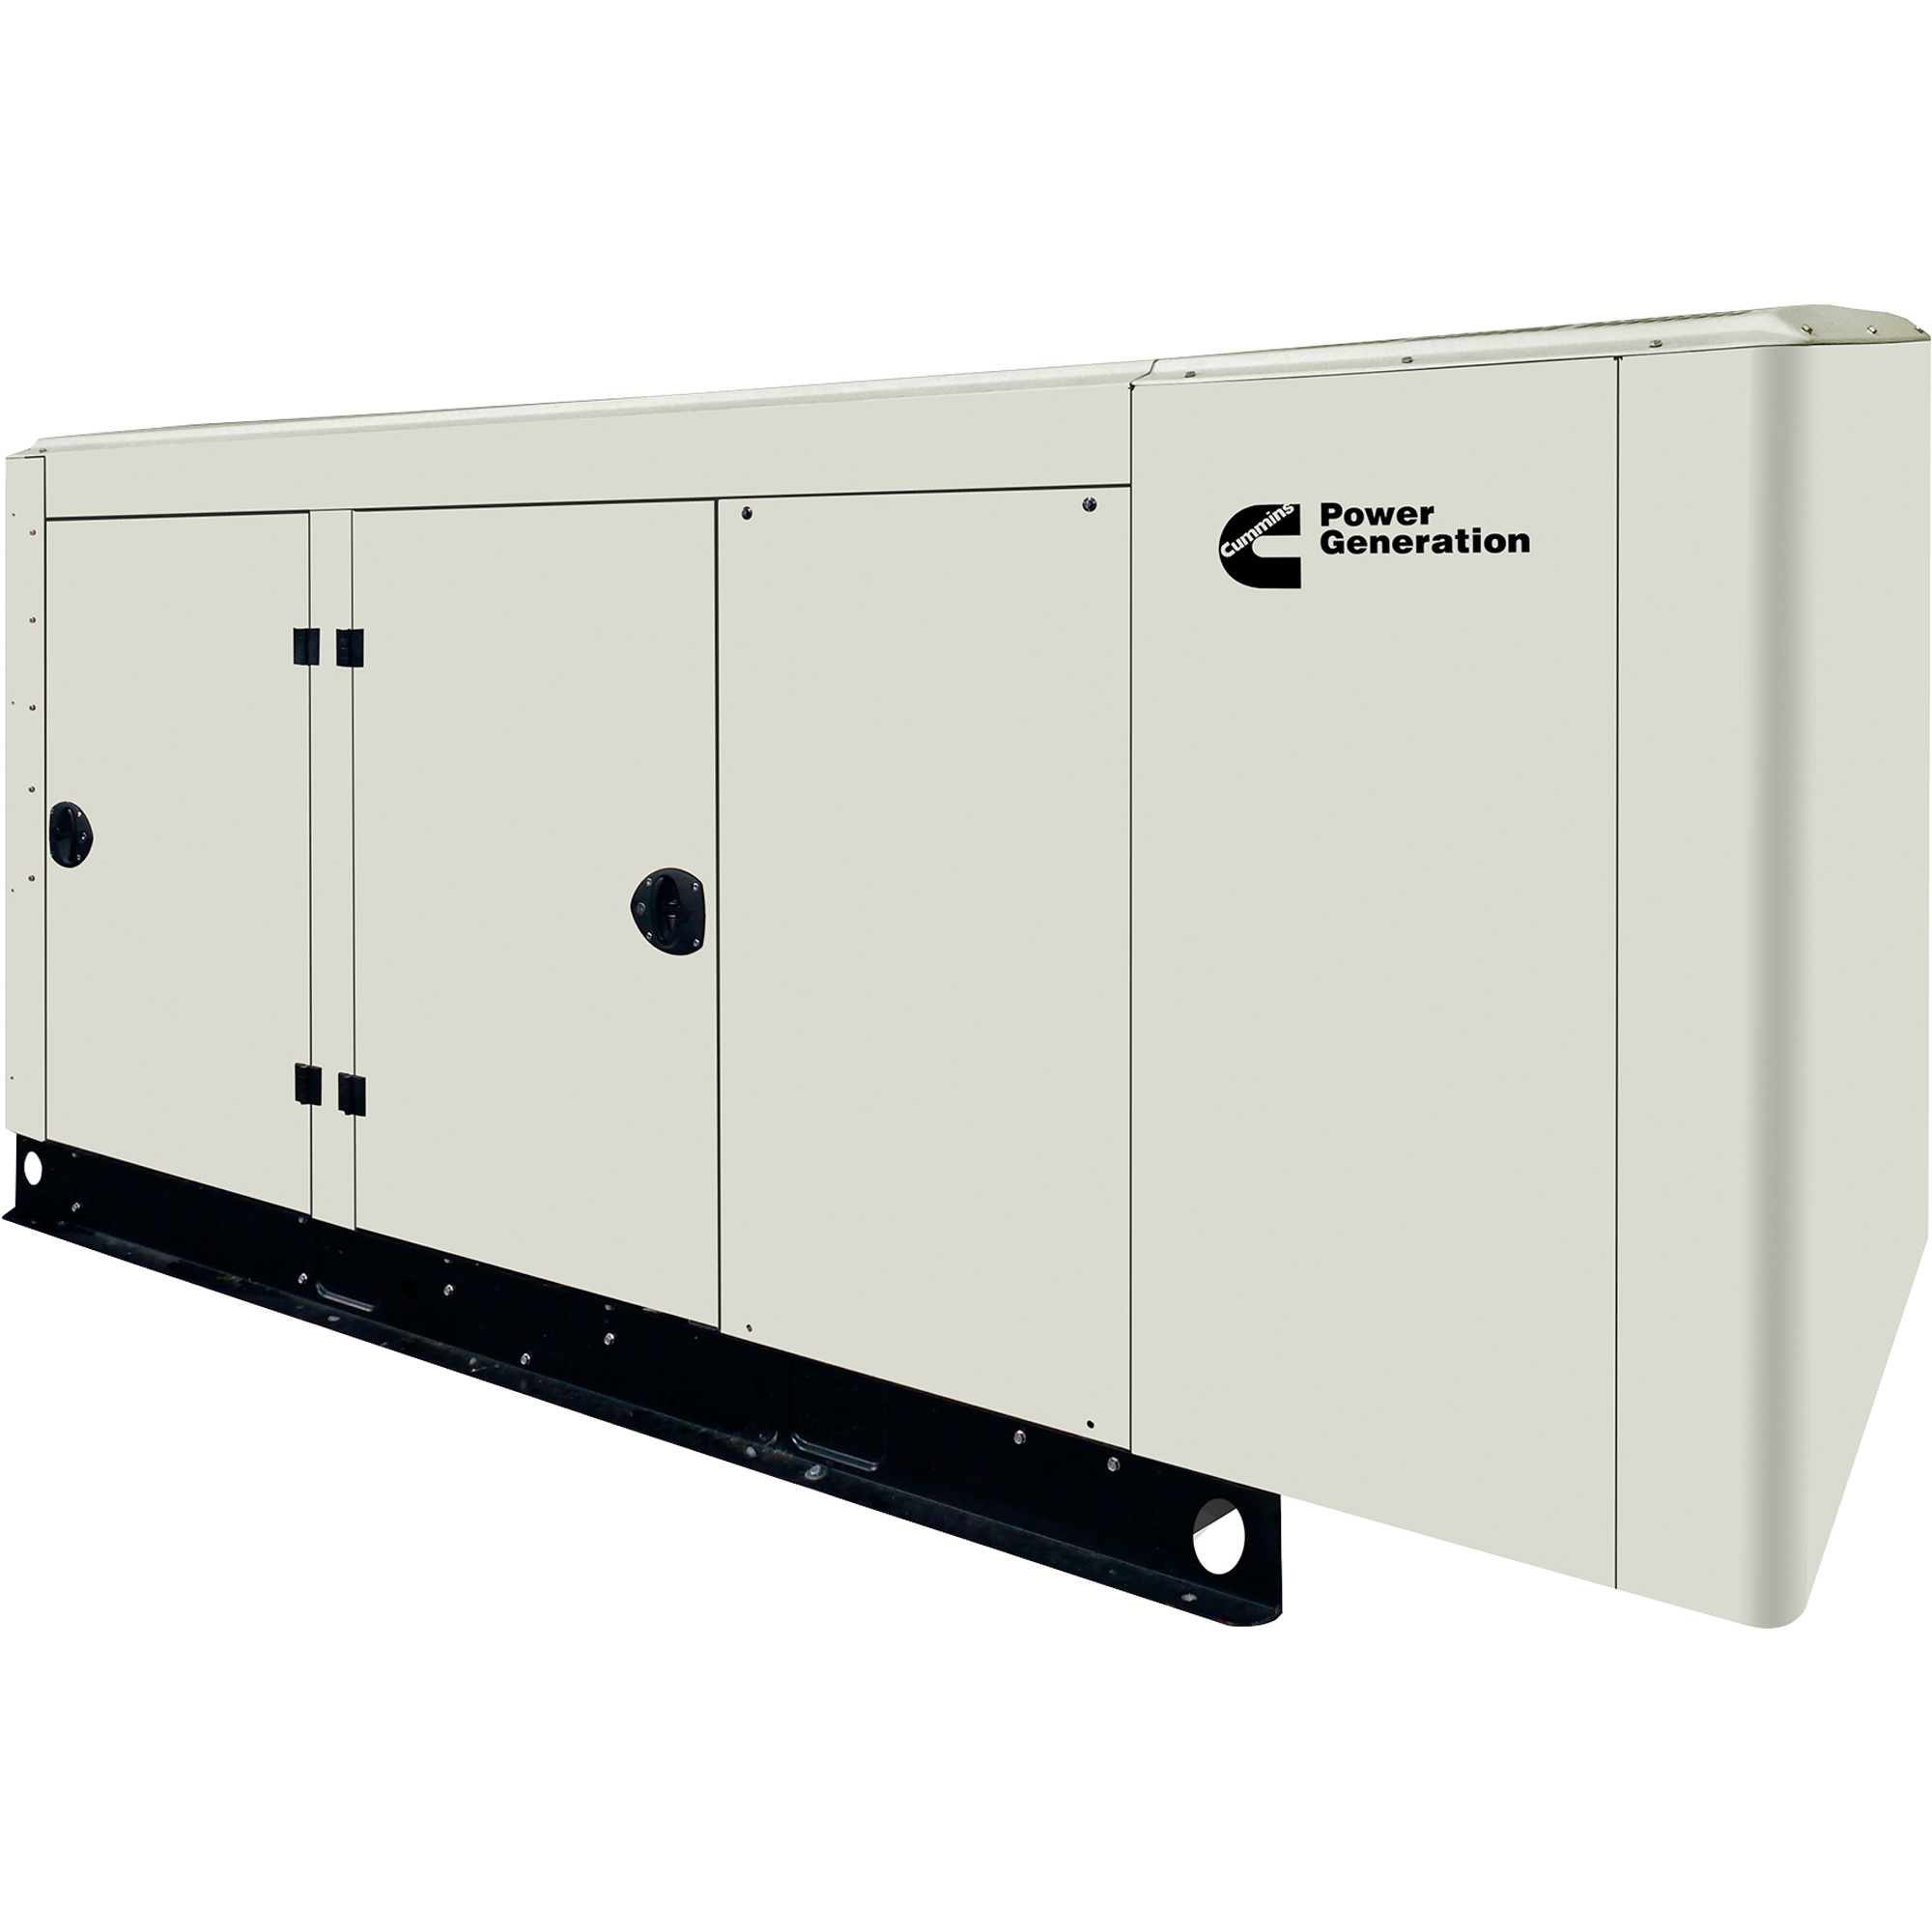 Cummins Commercial Standby Generator 80kW, LP/NG, 120/208 Volts, Single Phase